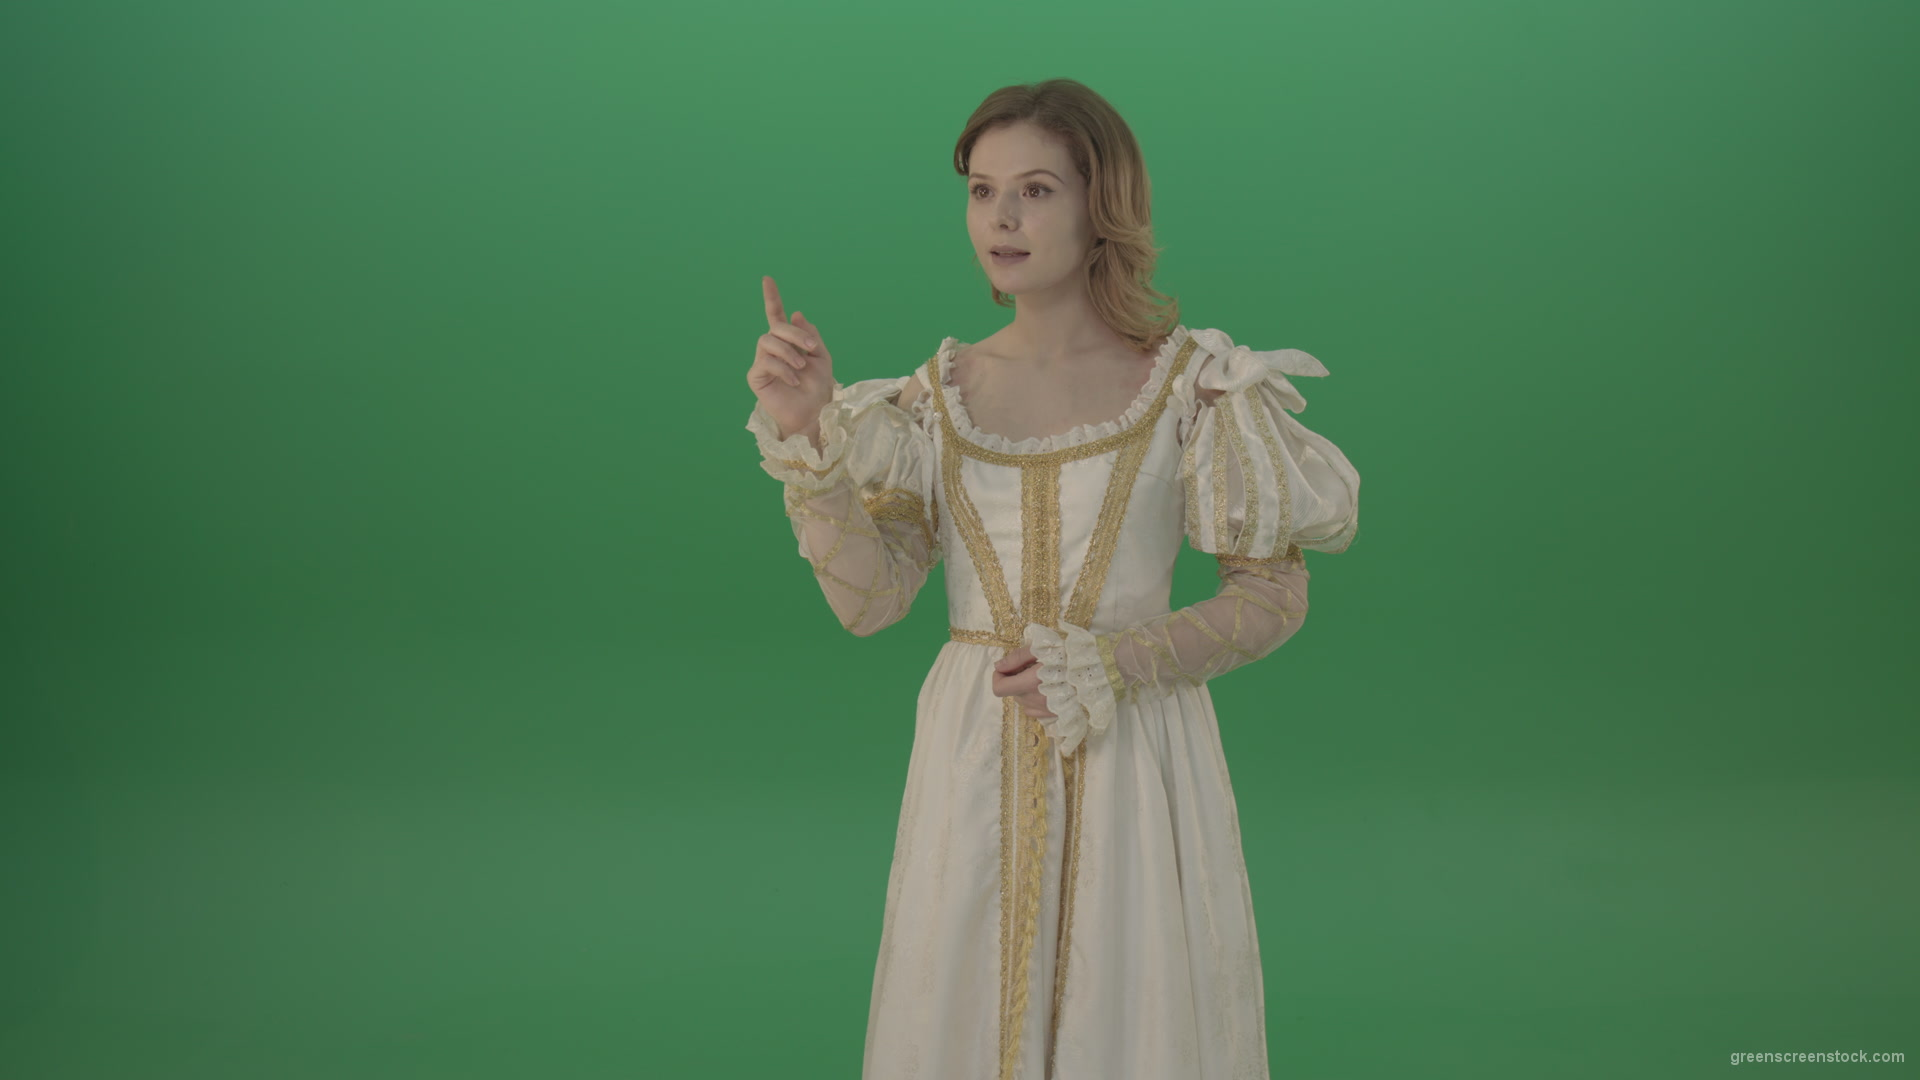 Girl-flips-a-virtual-screen-dressed-in-a-medieval-costume-isolated-on-green-screen_005 Green Screen Stock